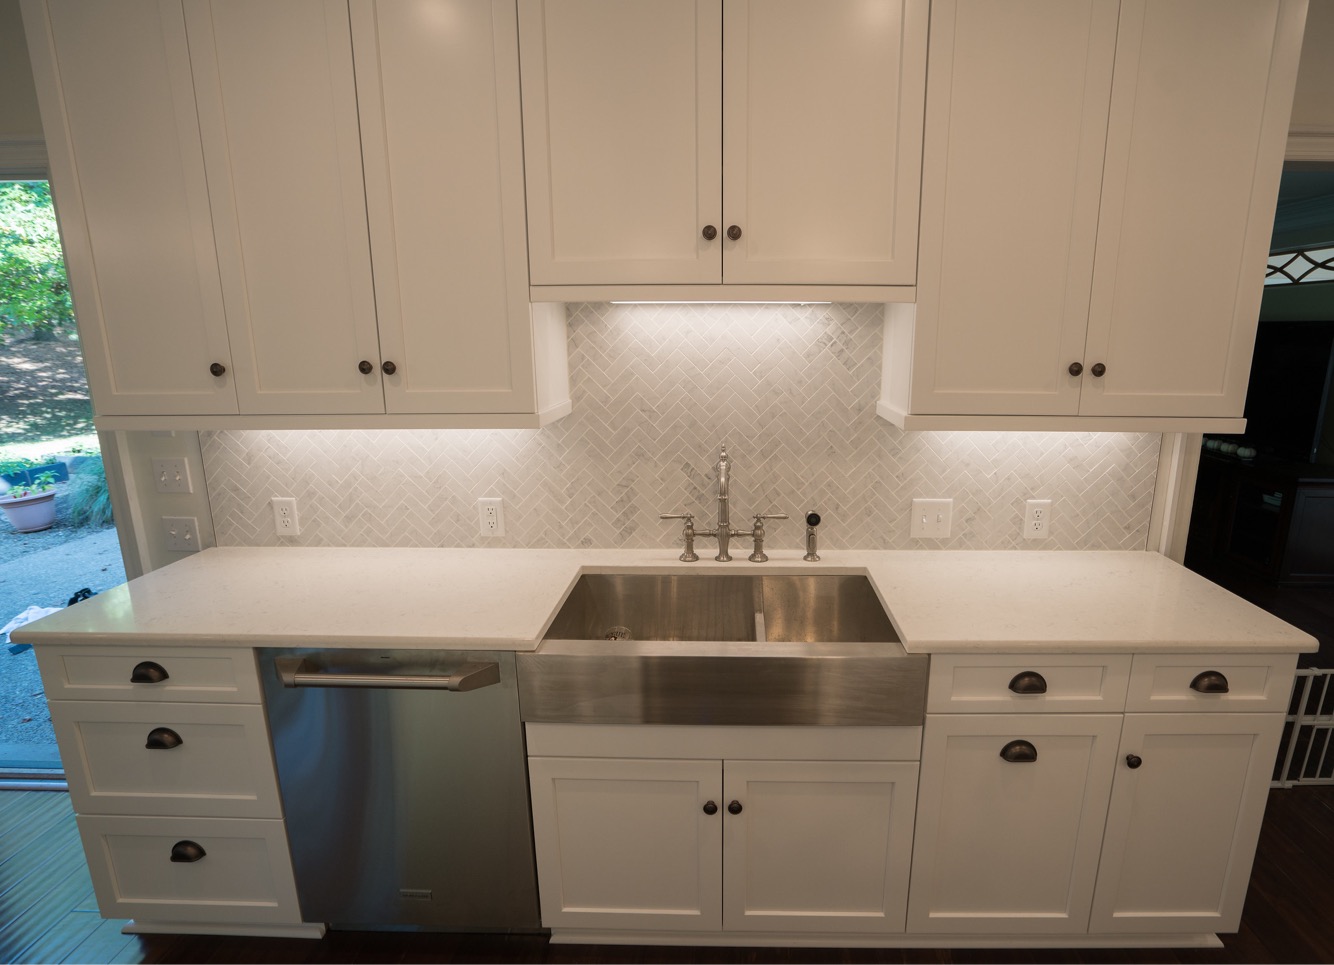 Classic white kitchen, farming sink, white countertop, white wall and base cabinets, light colored modern backsplash tiles